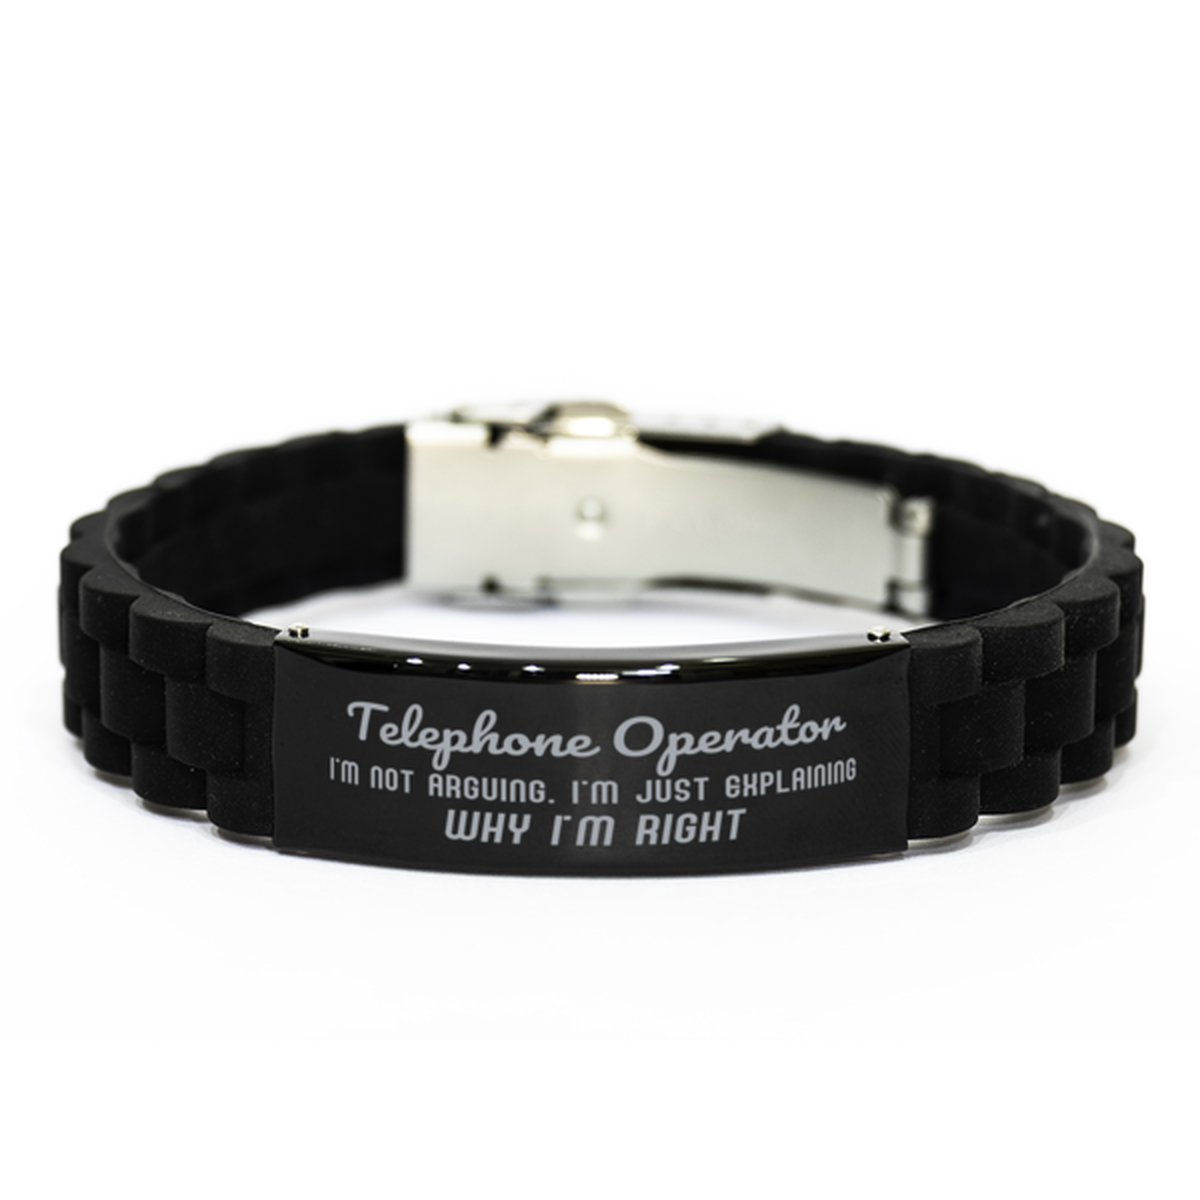 Telephone Operator I'm not Arguing. I'm Just Explaining Why I'm RIGHT Black Glidelock Clasp Bracelet, Funny Saying Quote Telephone Operator Gifts For Telephone Operator Graduation Birthday Christmas Gifts for Men Women Coworker